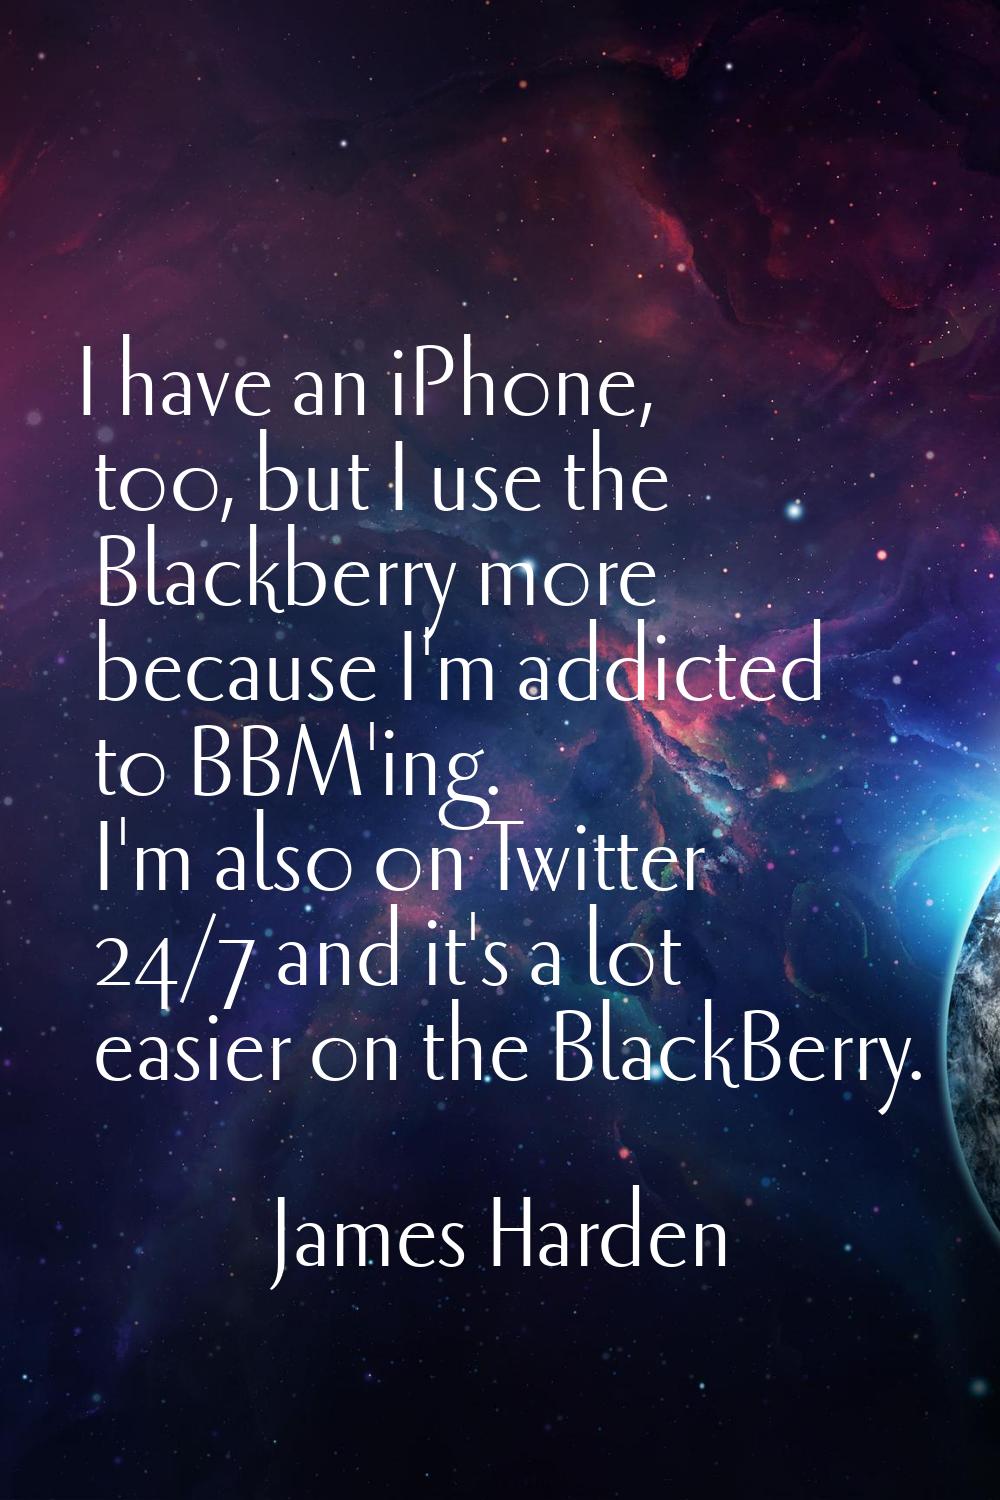 I have an iPhone, too, but I use the Blackberry more because I'm addicted to BBM'ing. I'm also on T